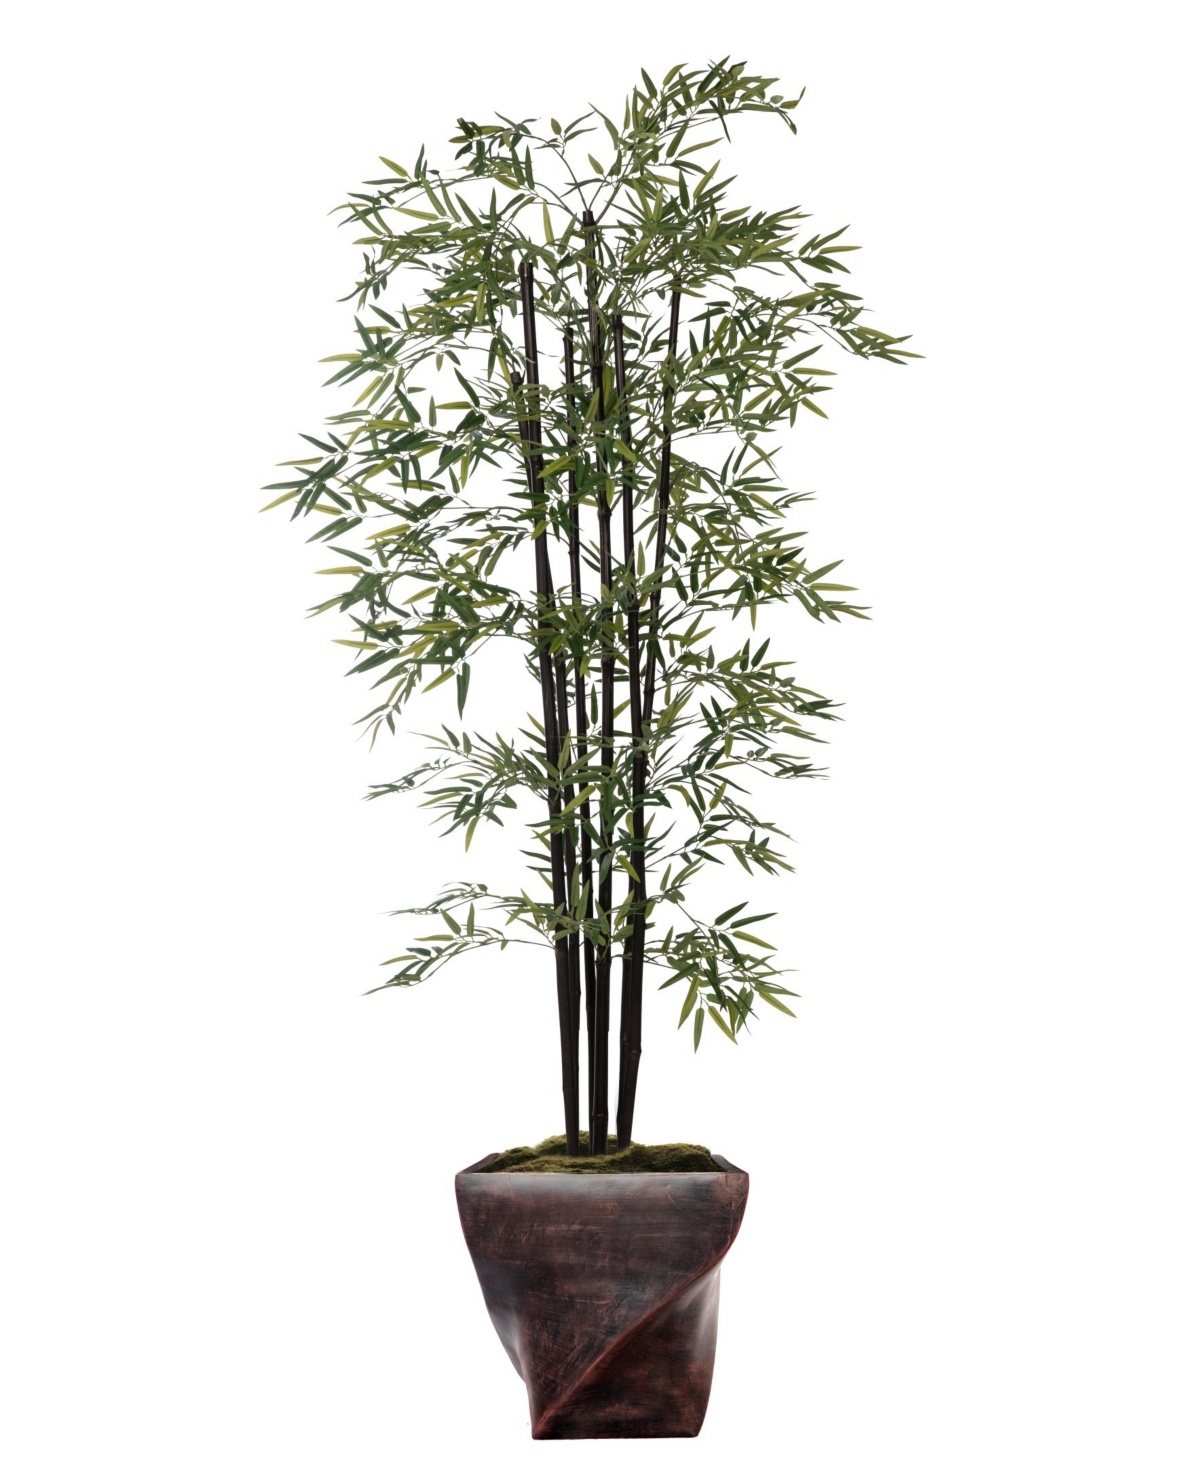 81.5" Tall Bamboo Tree With Decorative Black Poles and Fiberstone Planter - Green